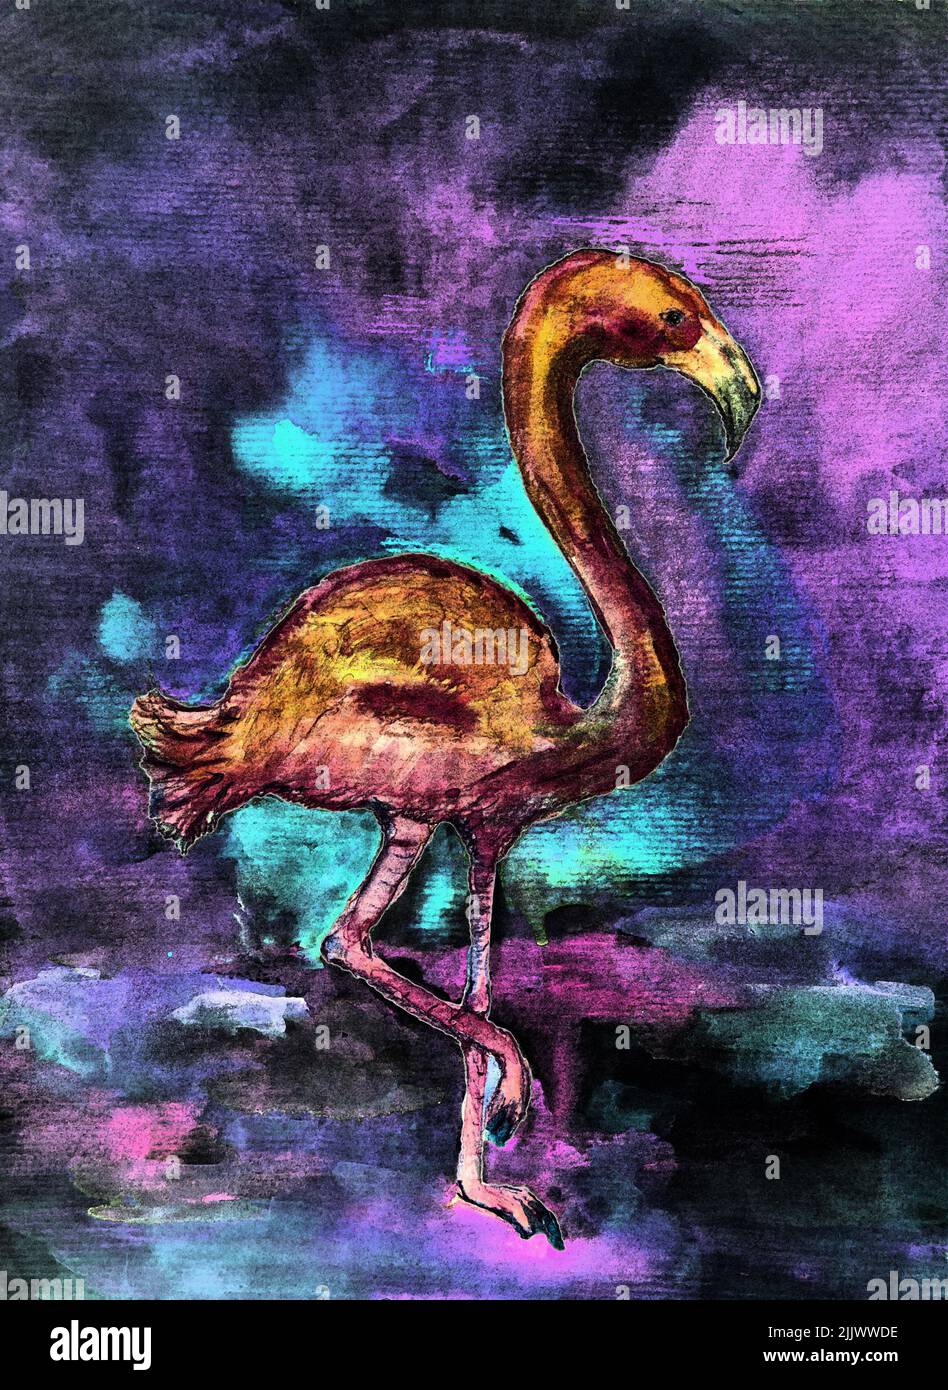 Psychedelic and trippy flamingo. The dabbing technique near the edges gives a soft focus effect due to the altered surface roughness of the paper. Stock Photo